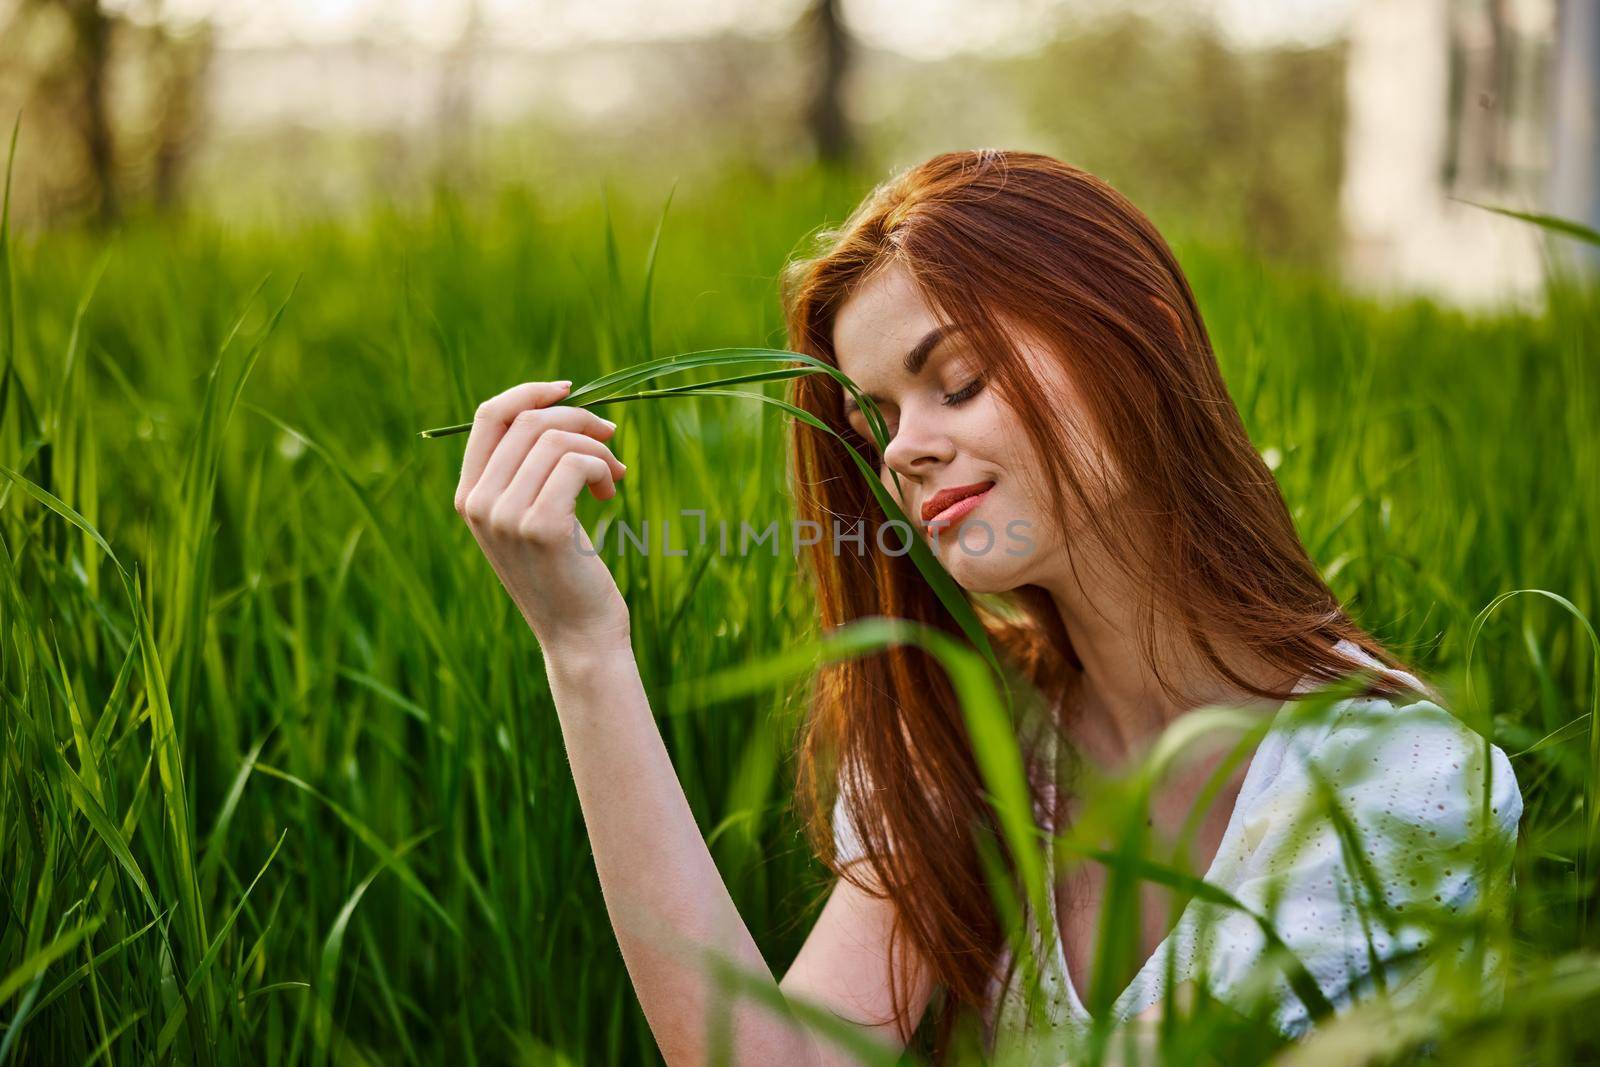 portrait of a cute red-haired woman sitting in tall grass and holding a leaf in her hands. High quality photo